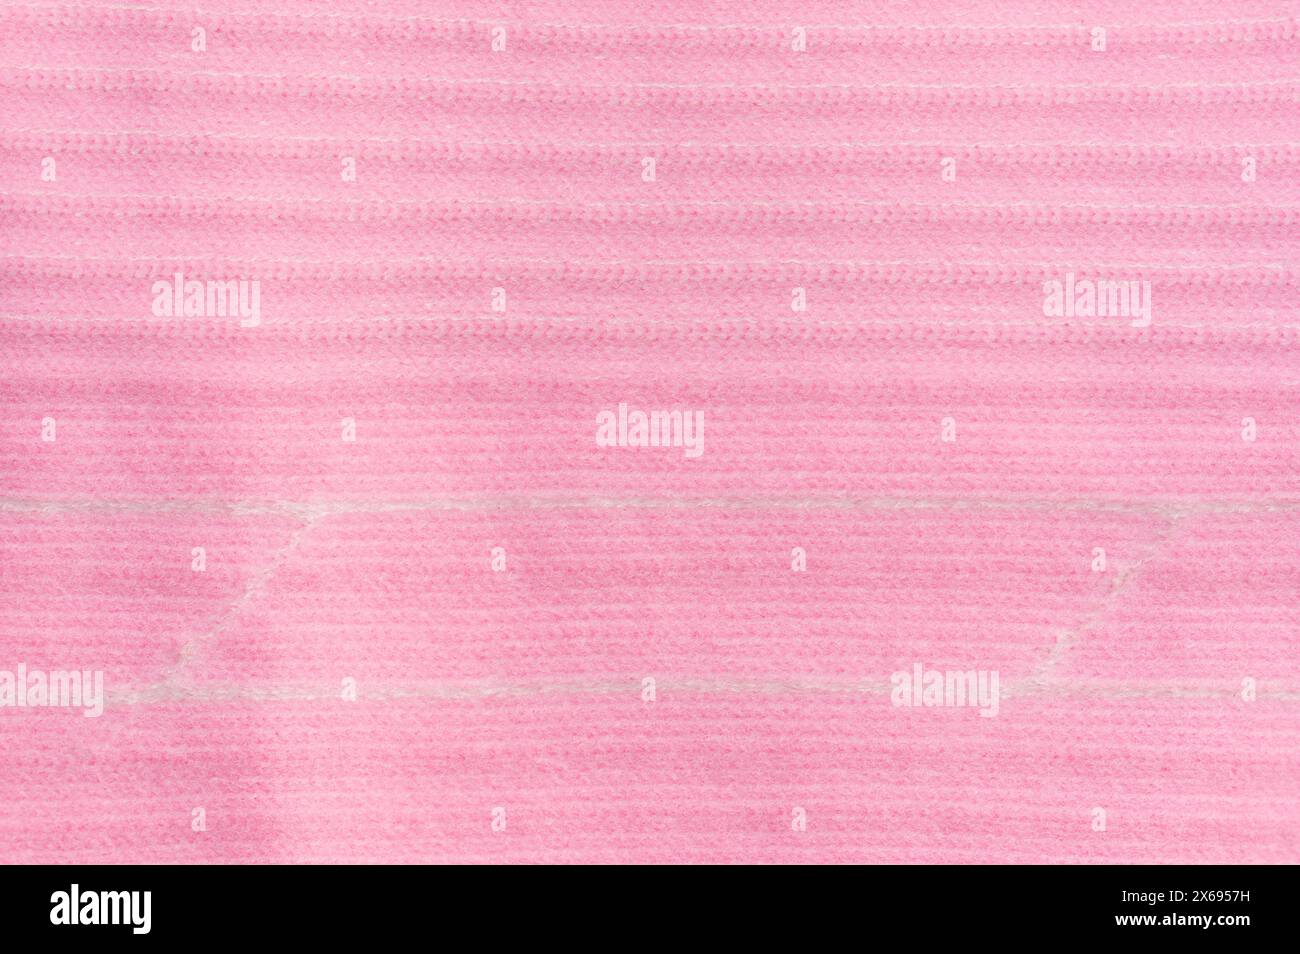 Pink wool craft texture background macro close up view Stock Photo